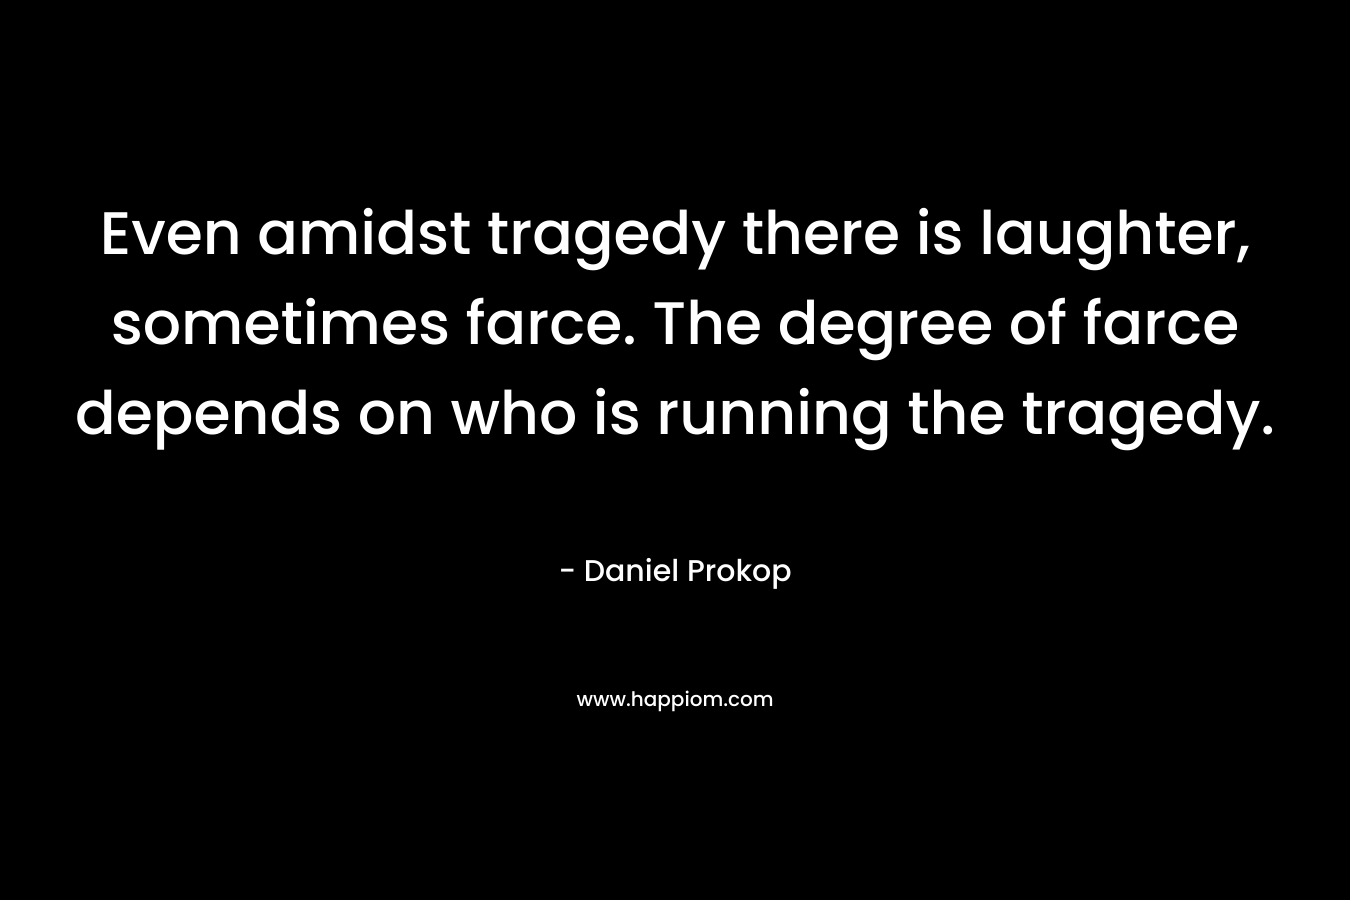 Even amidst tragedy there is laughter, sometimes farce. The degree of farce depends on who is running the tragedy. – Daniel Prokop